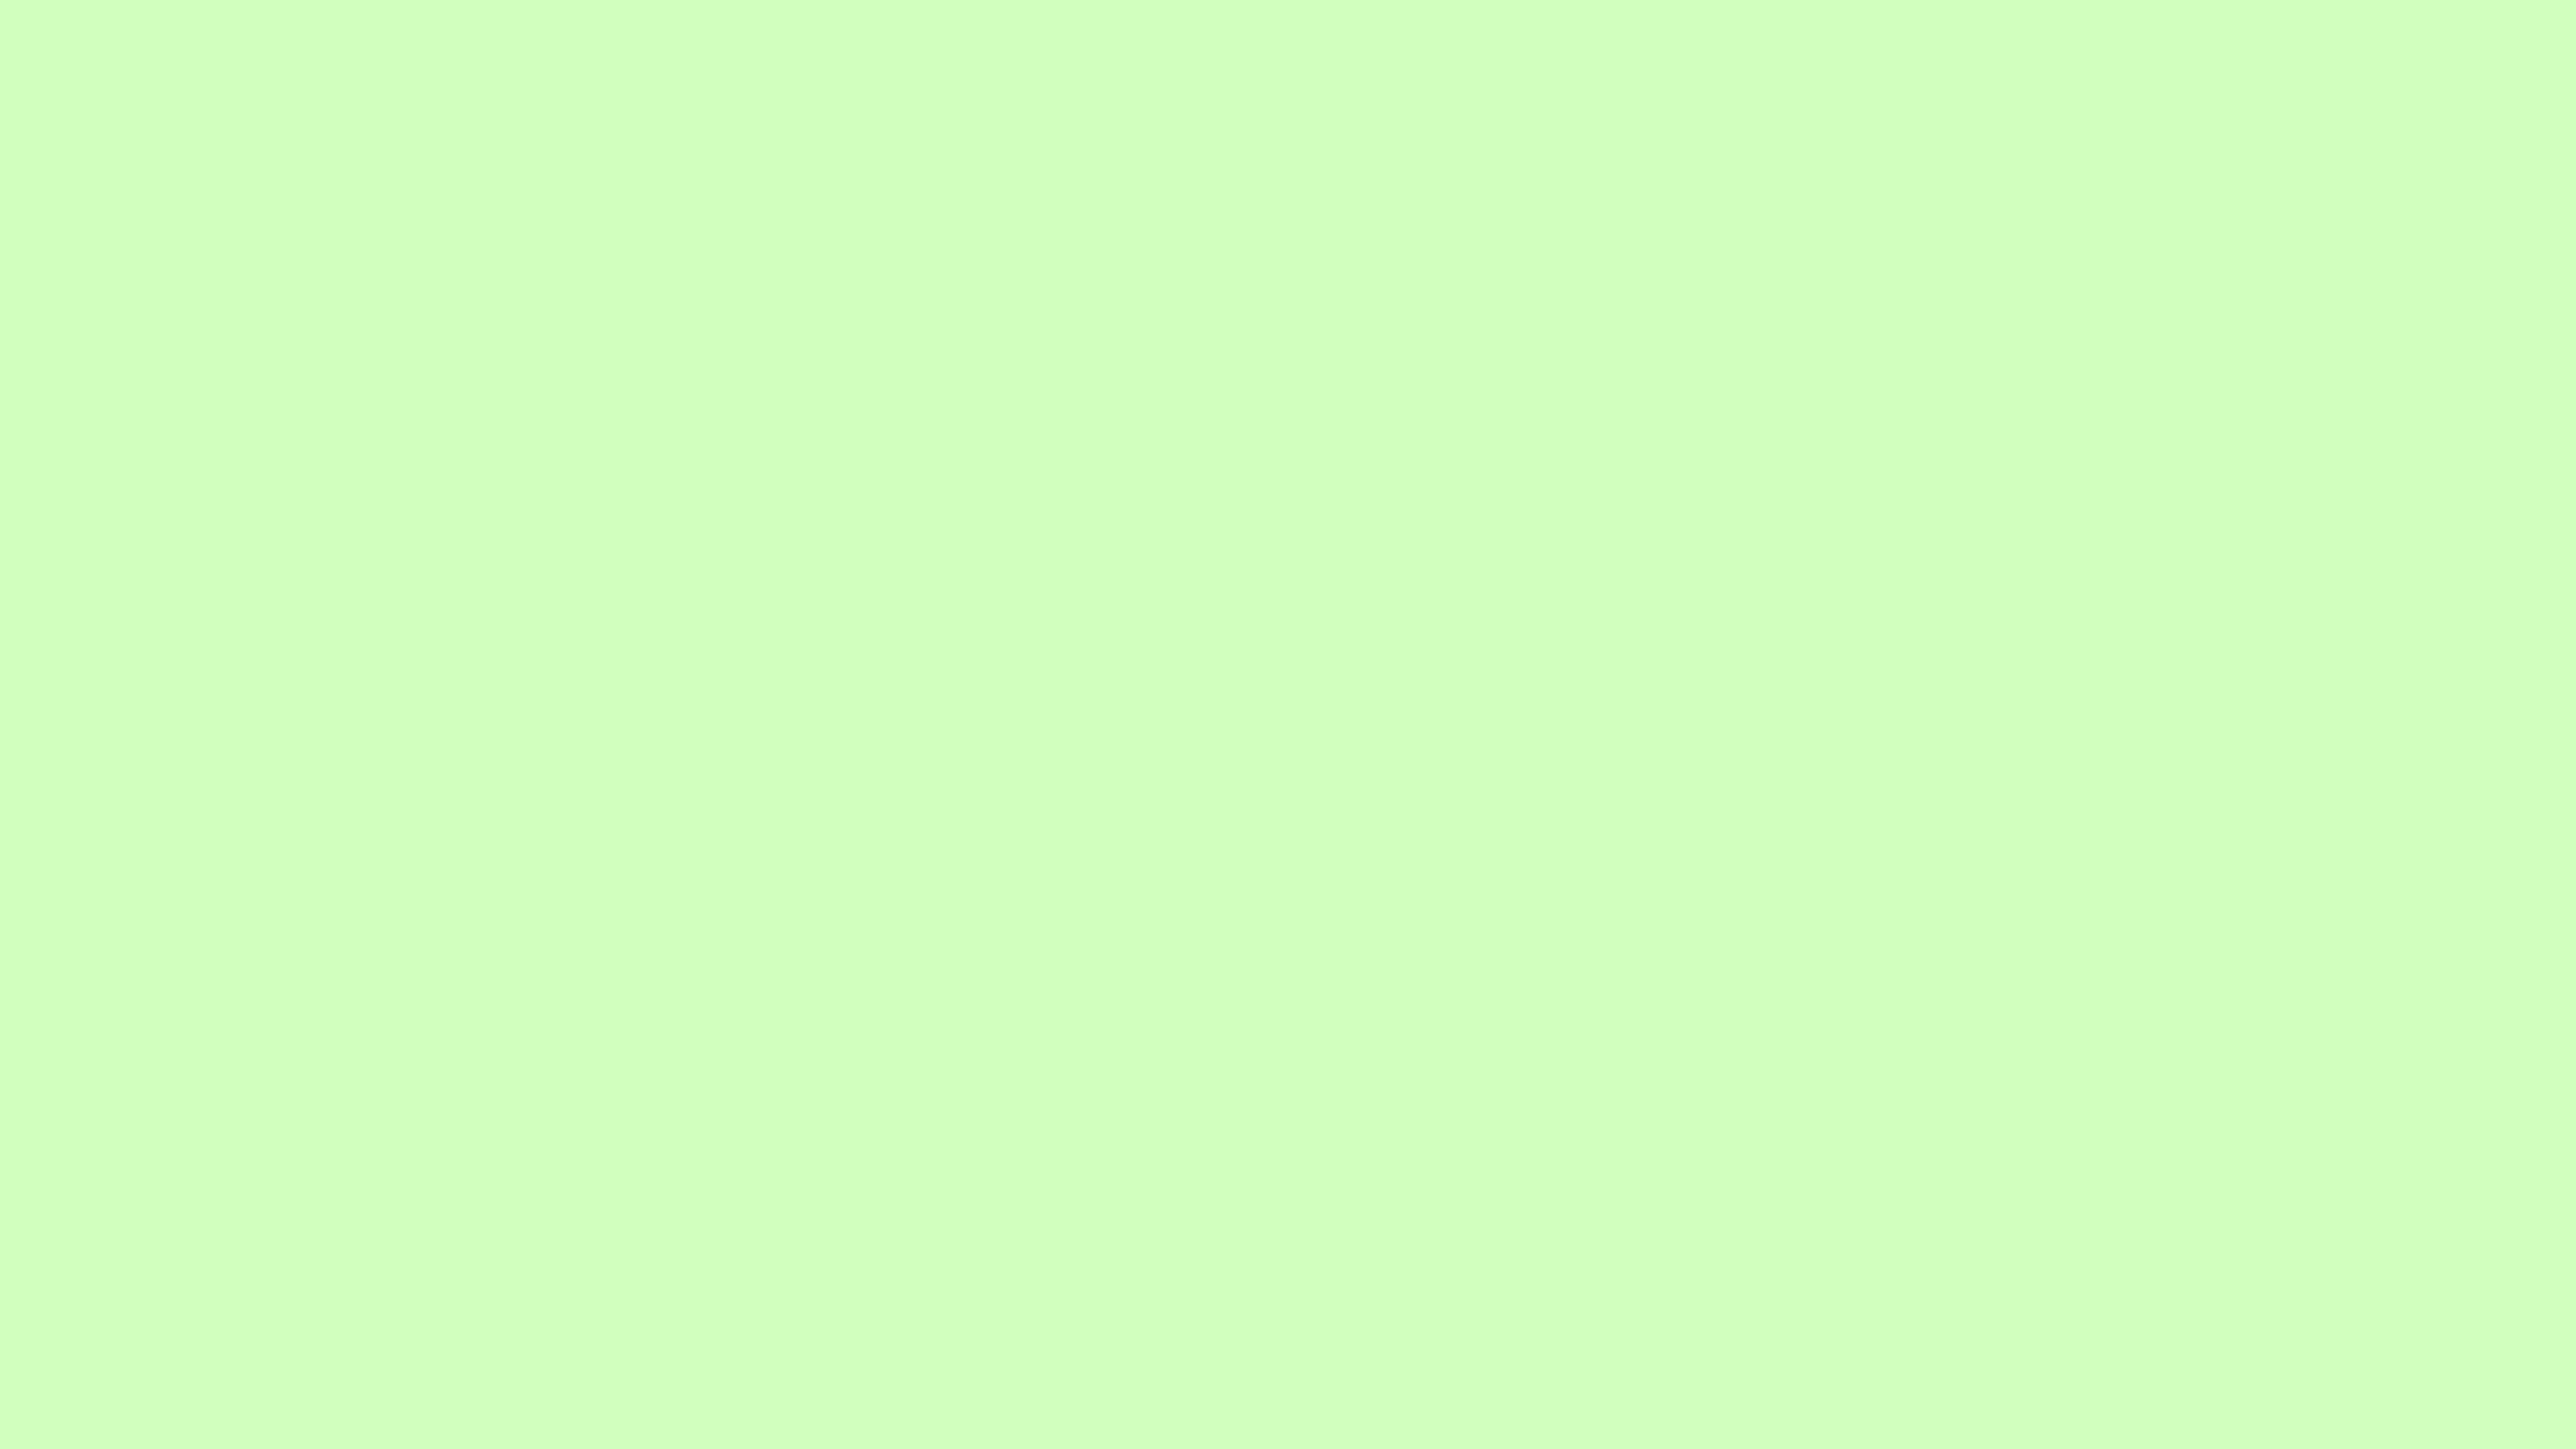 Very Light Green Solid Color Background Image